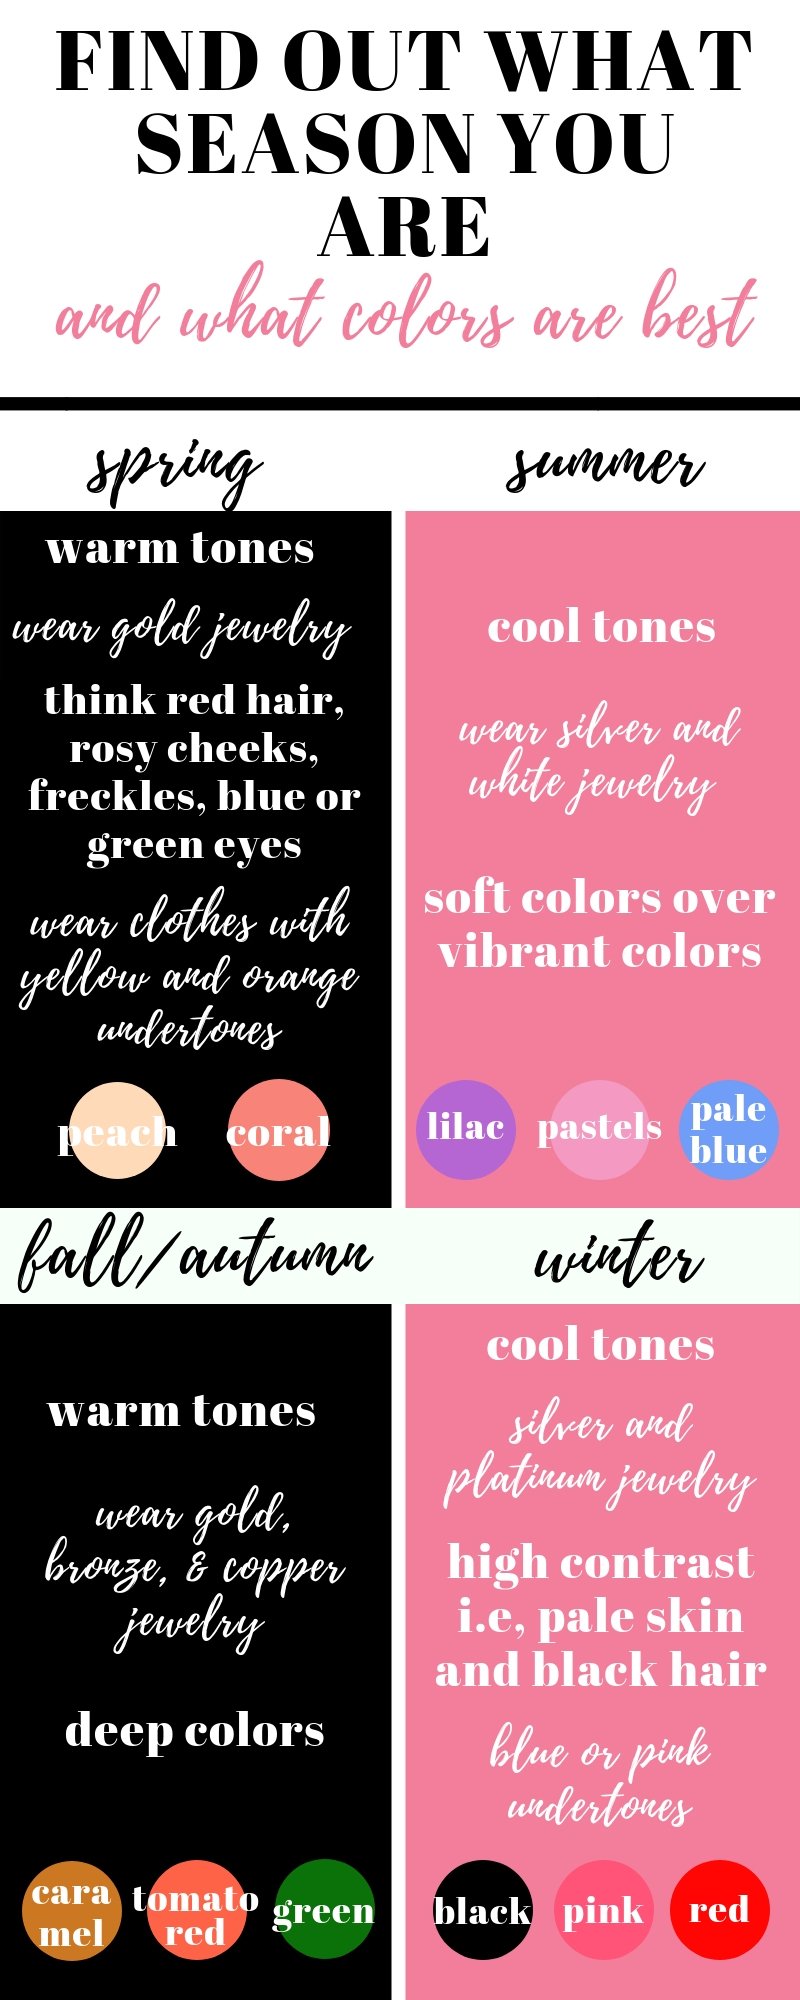 Use this guide on clothing colors for your skin to help in shopping when you need to build a wardrobe from scratch!